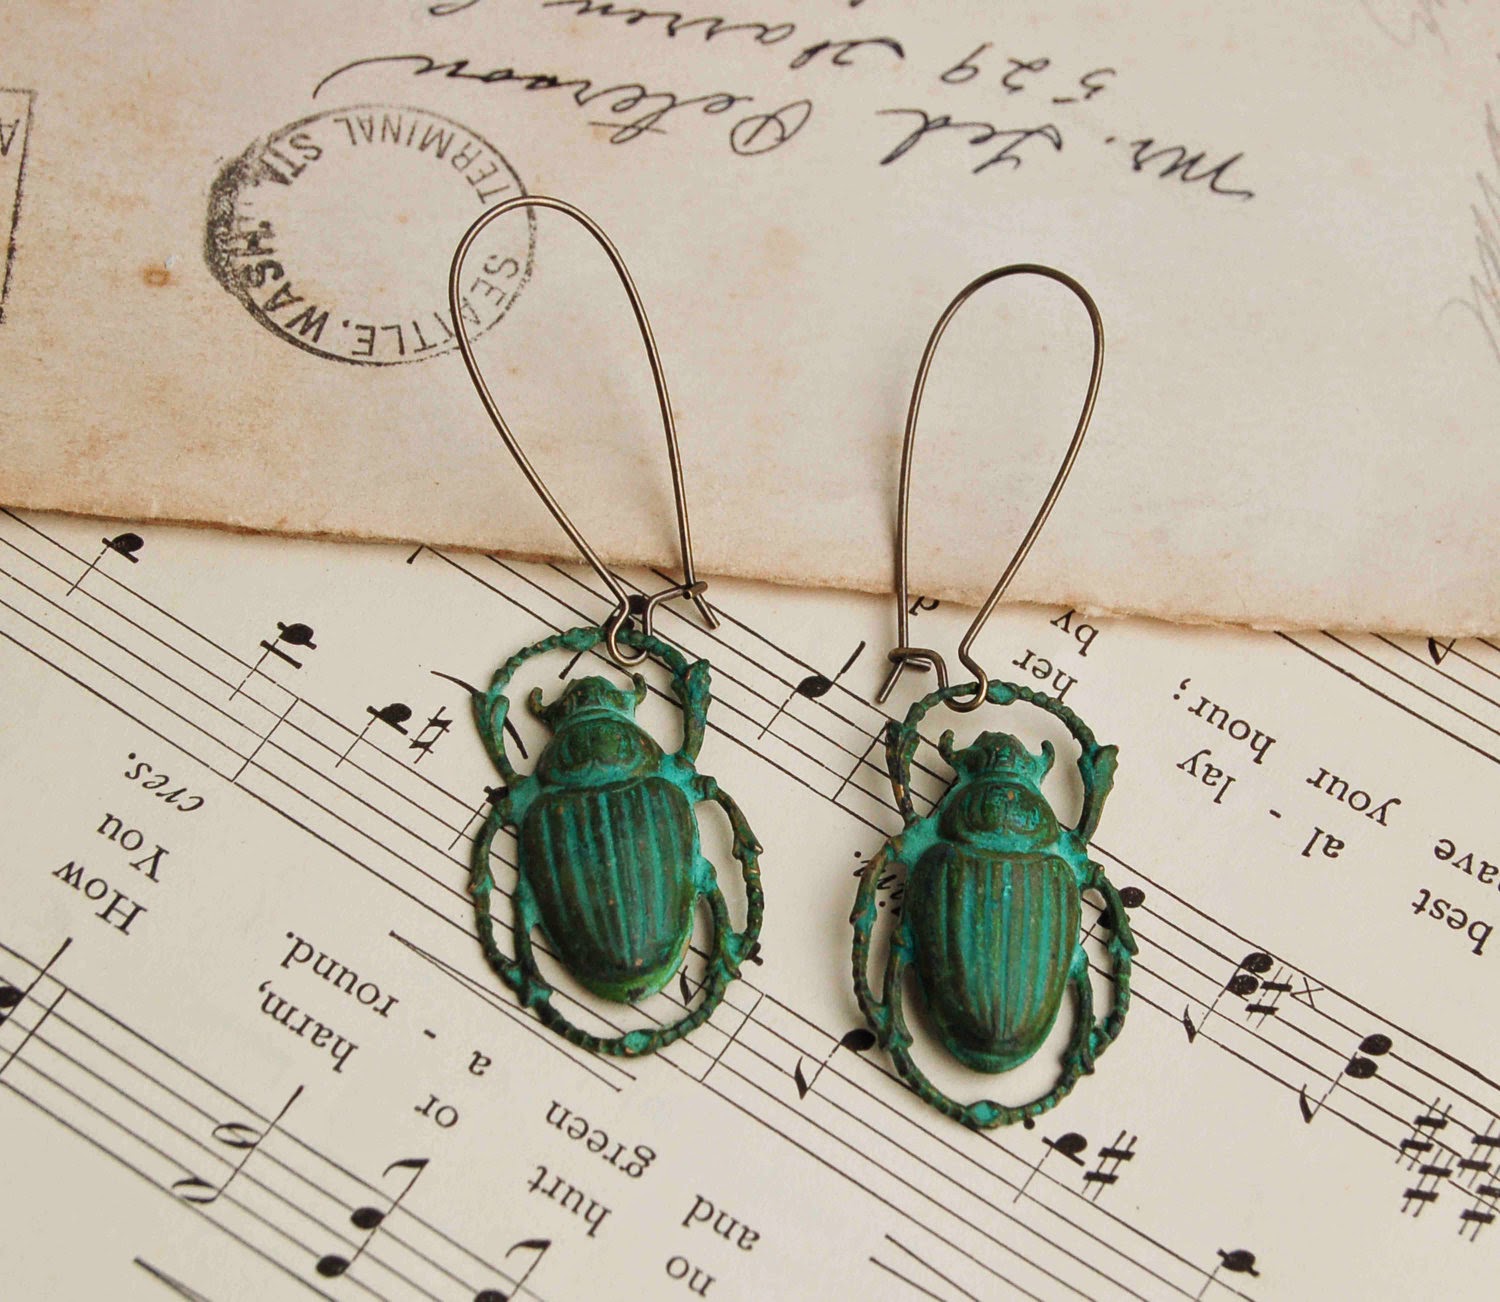 https://www.etsy.com/listing/89823023/steam-punk-green-beetle-earrings?ref=shop_home_active_5&ga_search_query=beetle